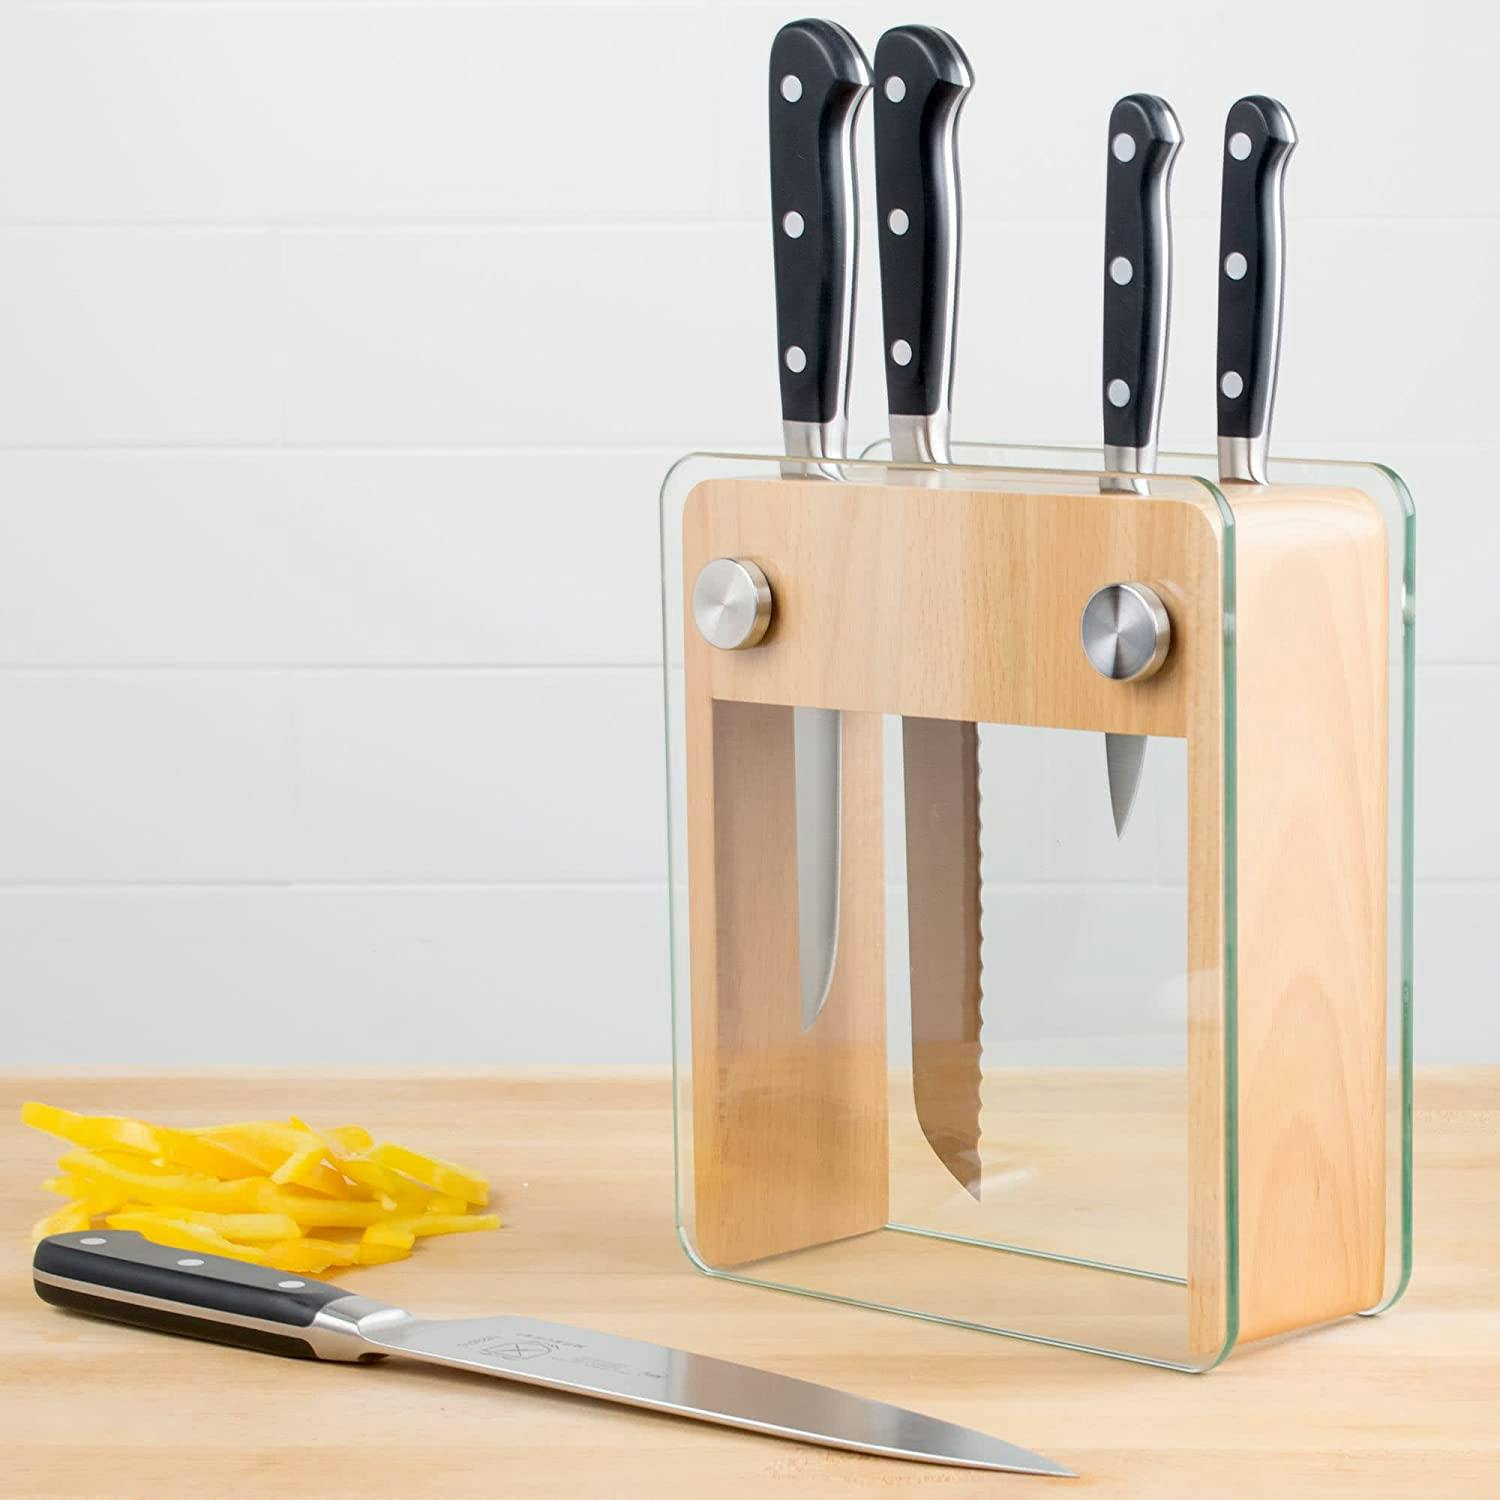 Mercer Culinary Zum 6pc Forged Stainless Steel Knife Block Set w